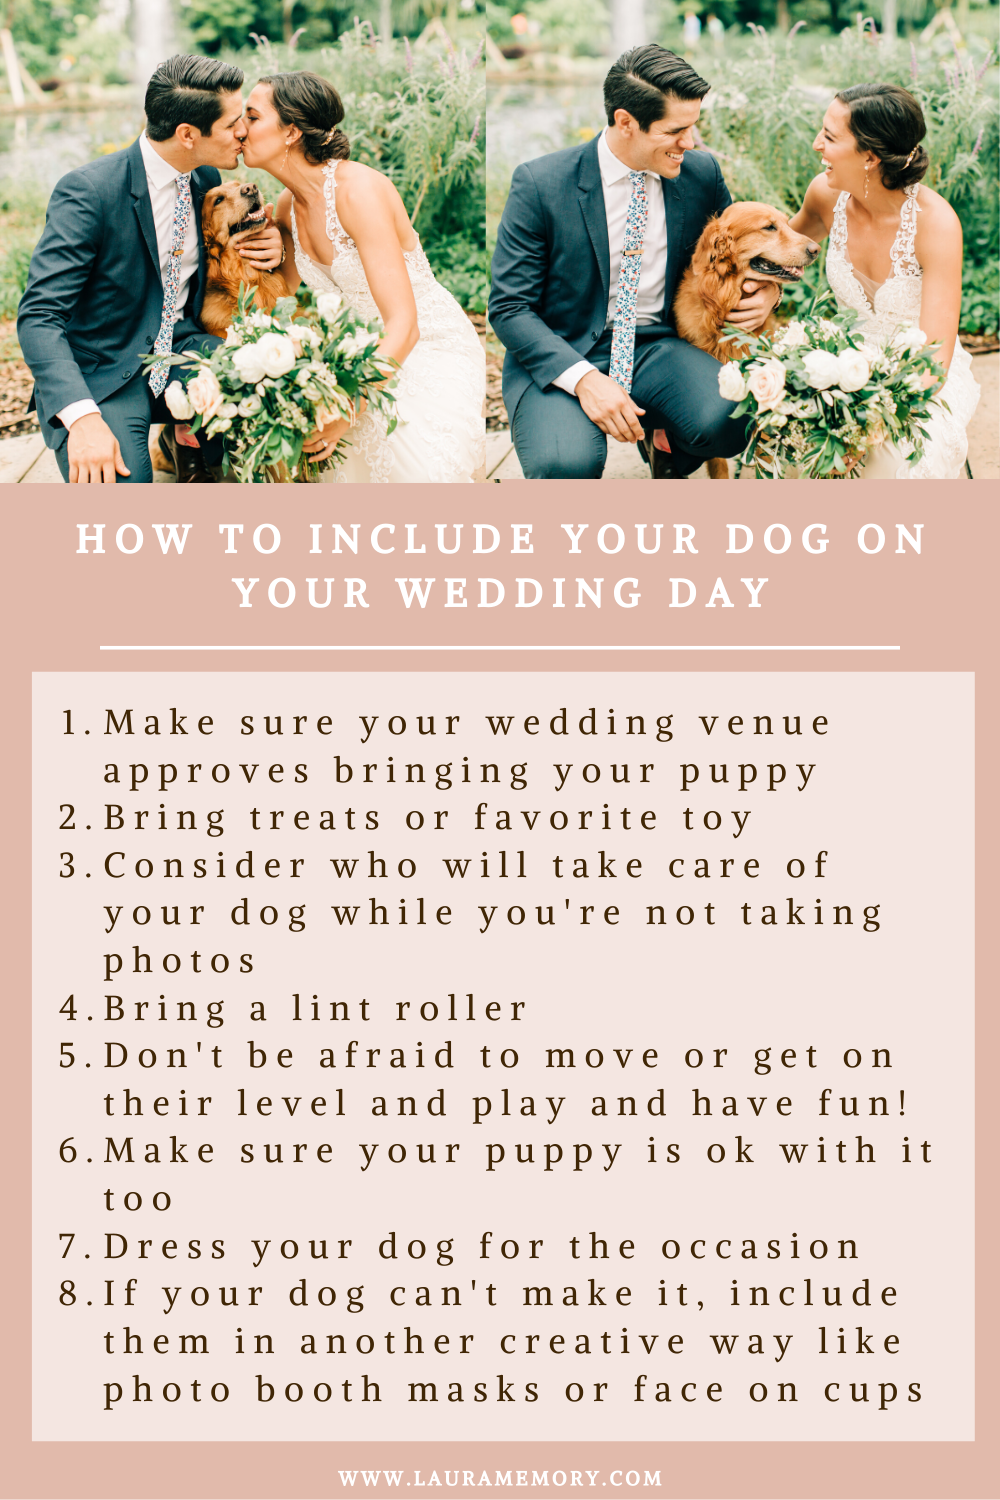 How to include my dog on my wedding day, wedding day photography with my dog